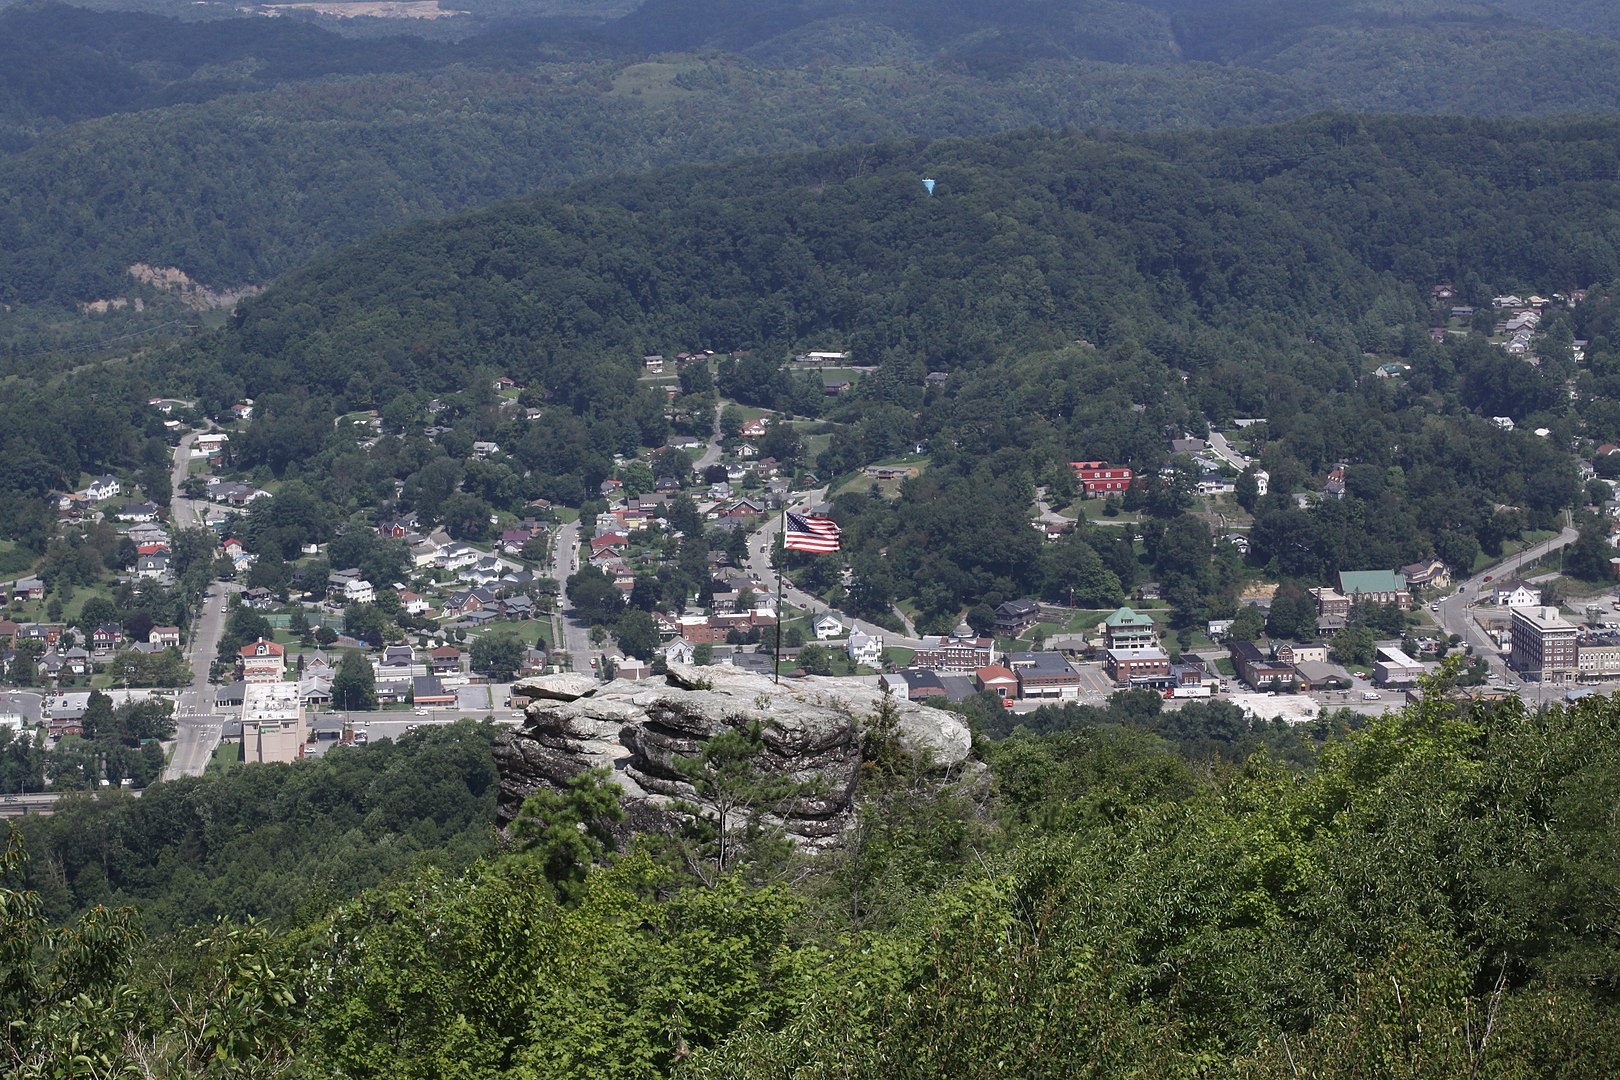 View of small town surrounded by mountains, American flag in foreground